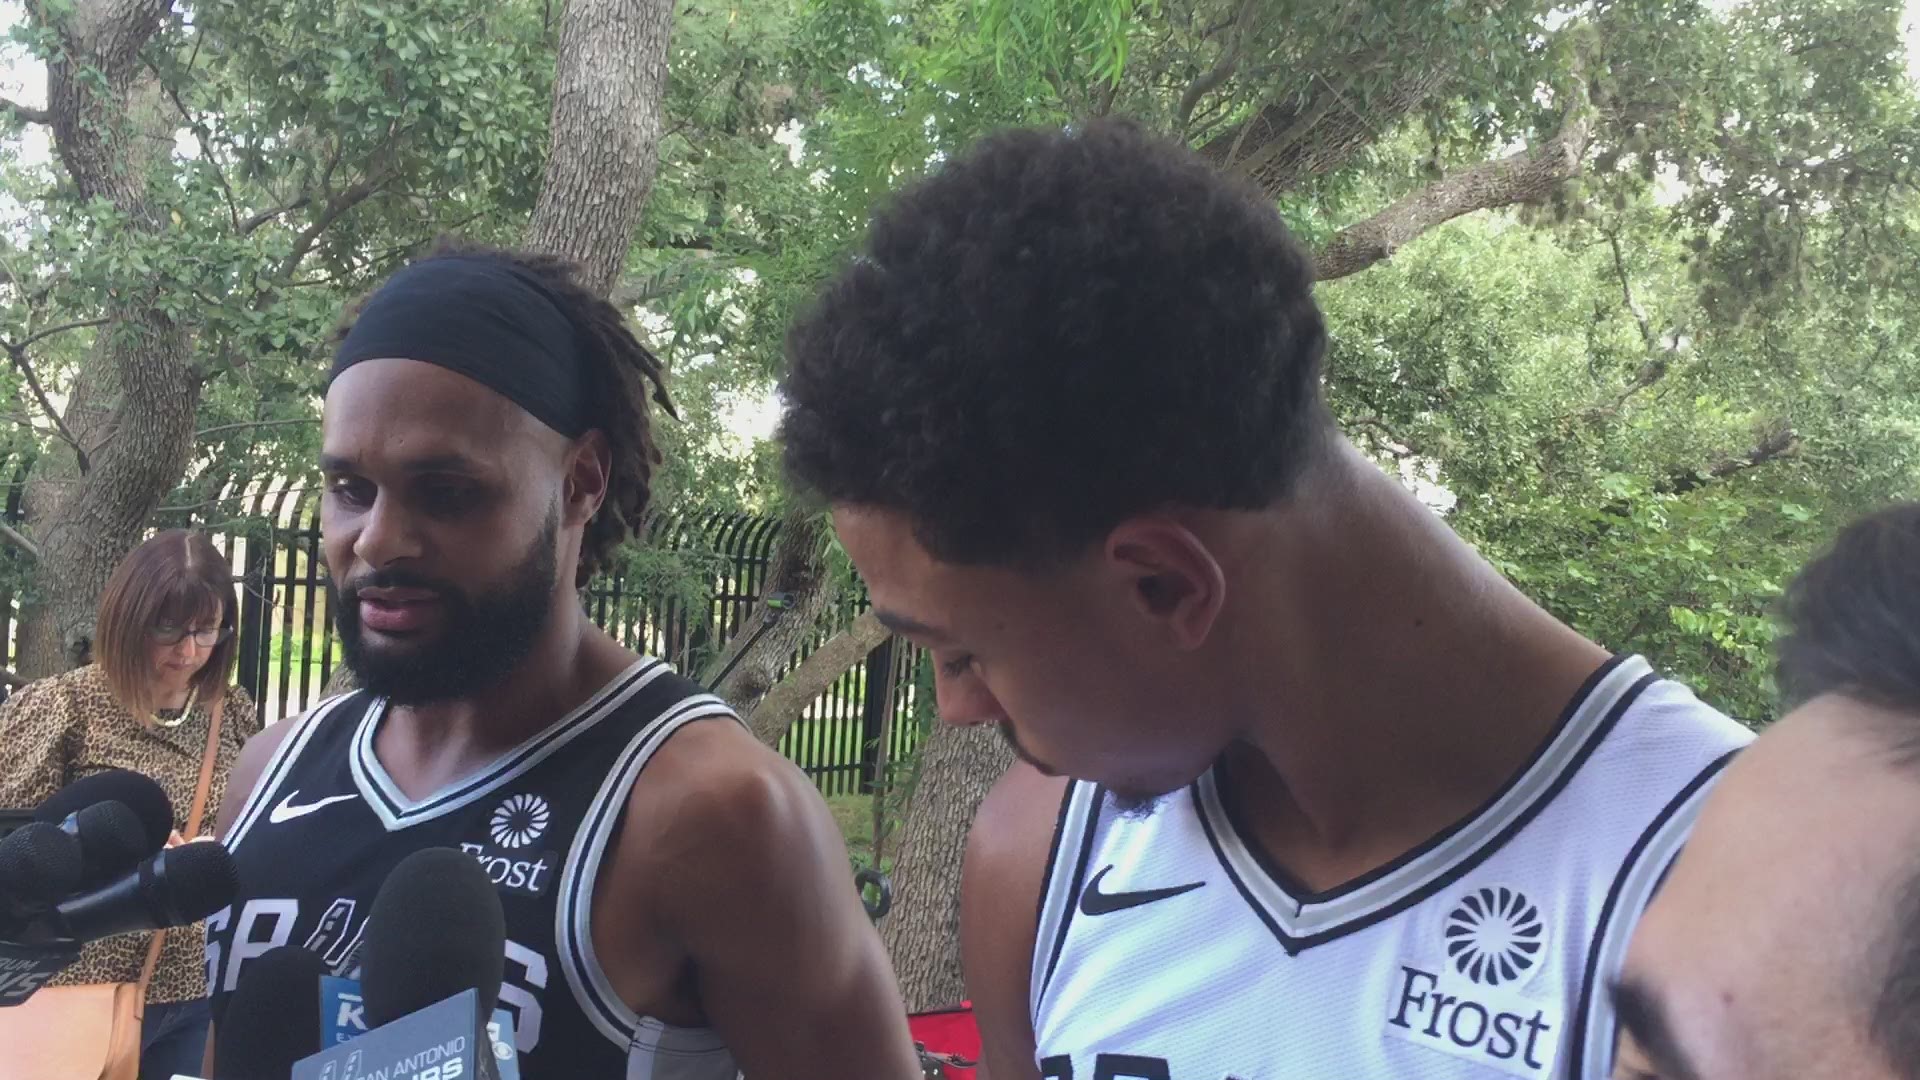 Spurs guards Patty Milly and Bryn Forbes on starting training camp